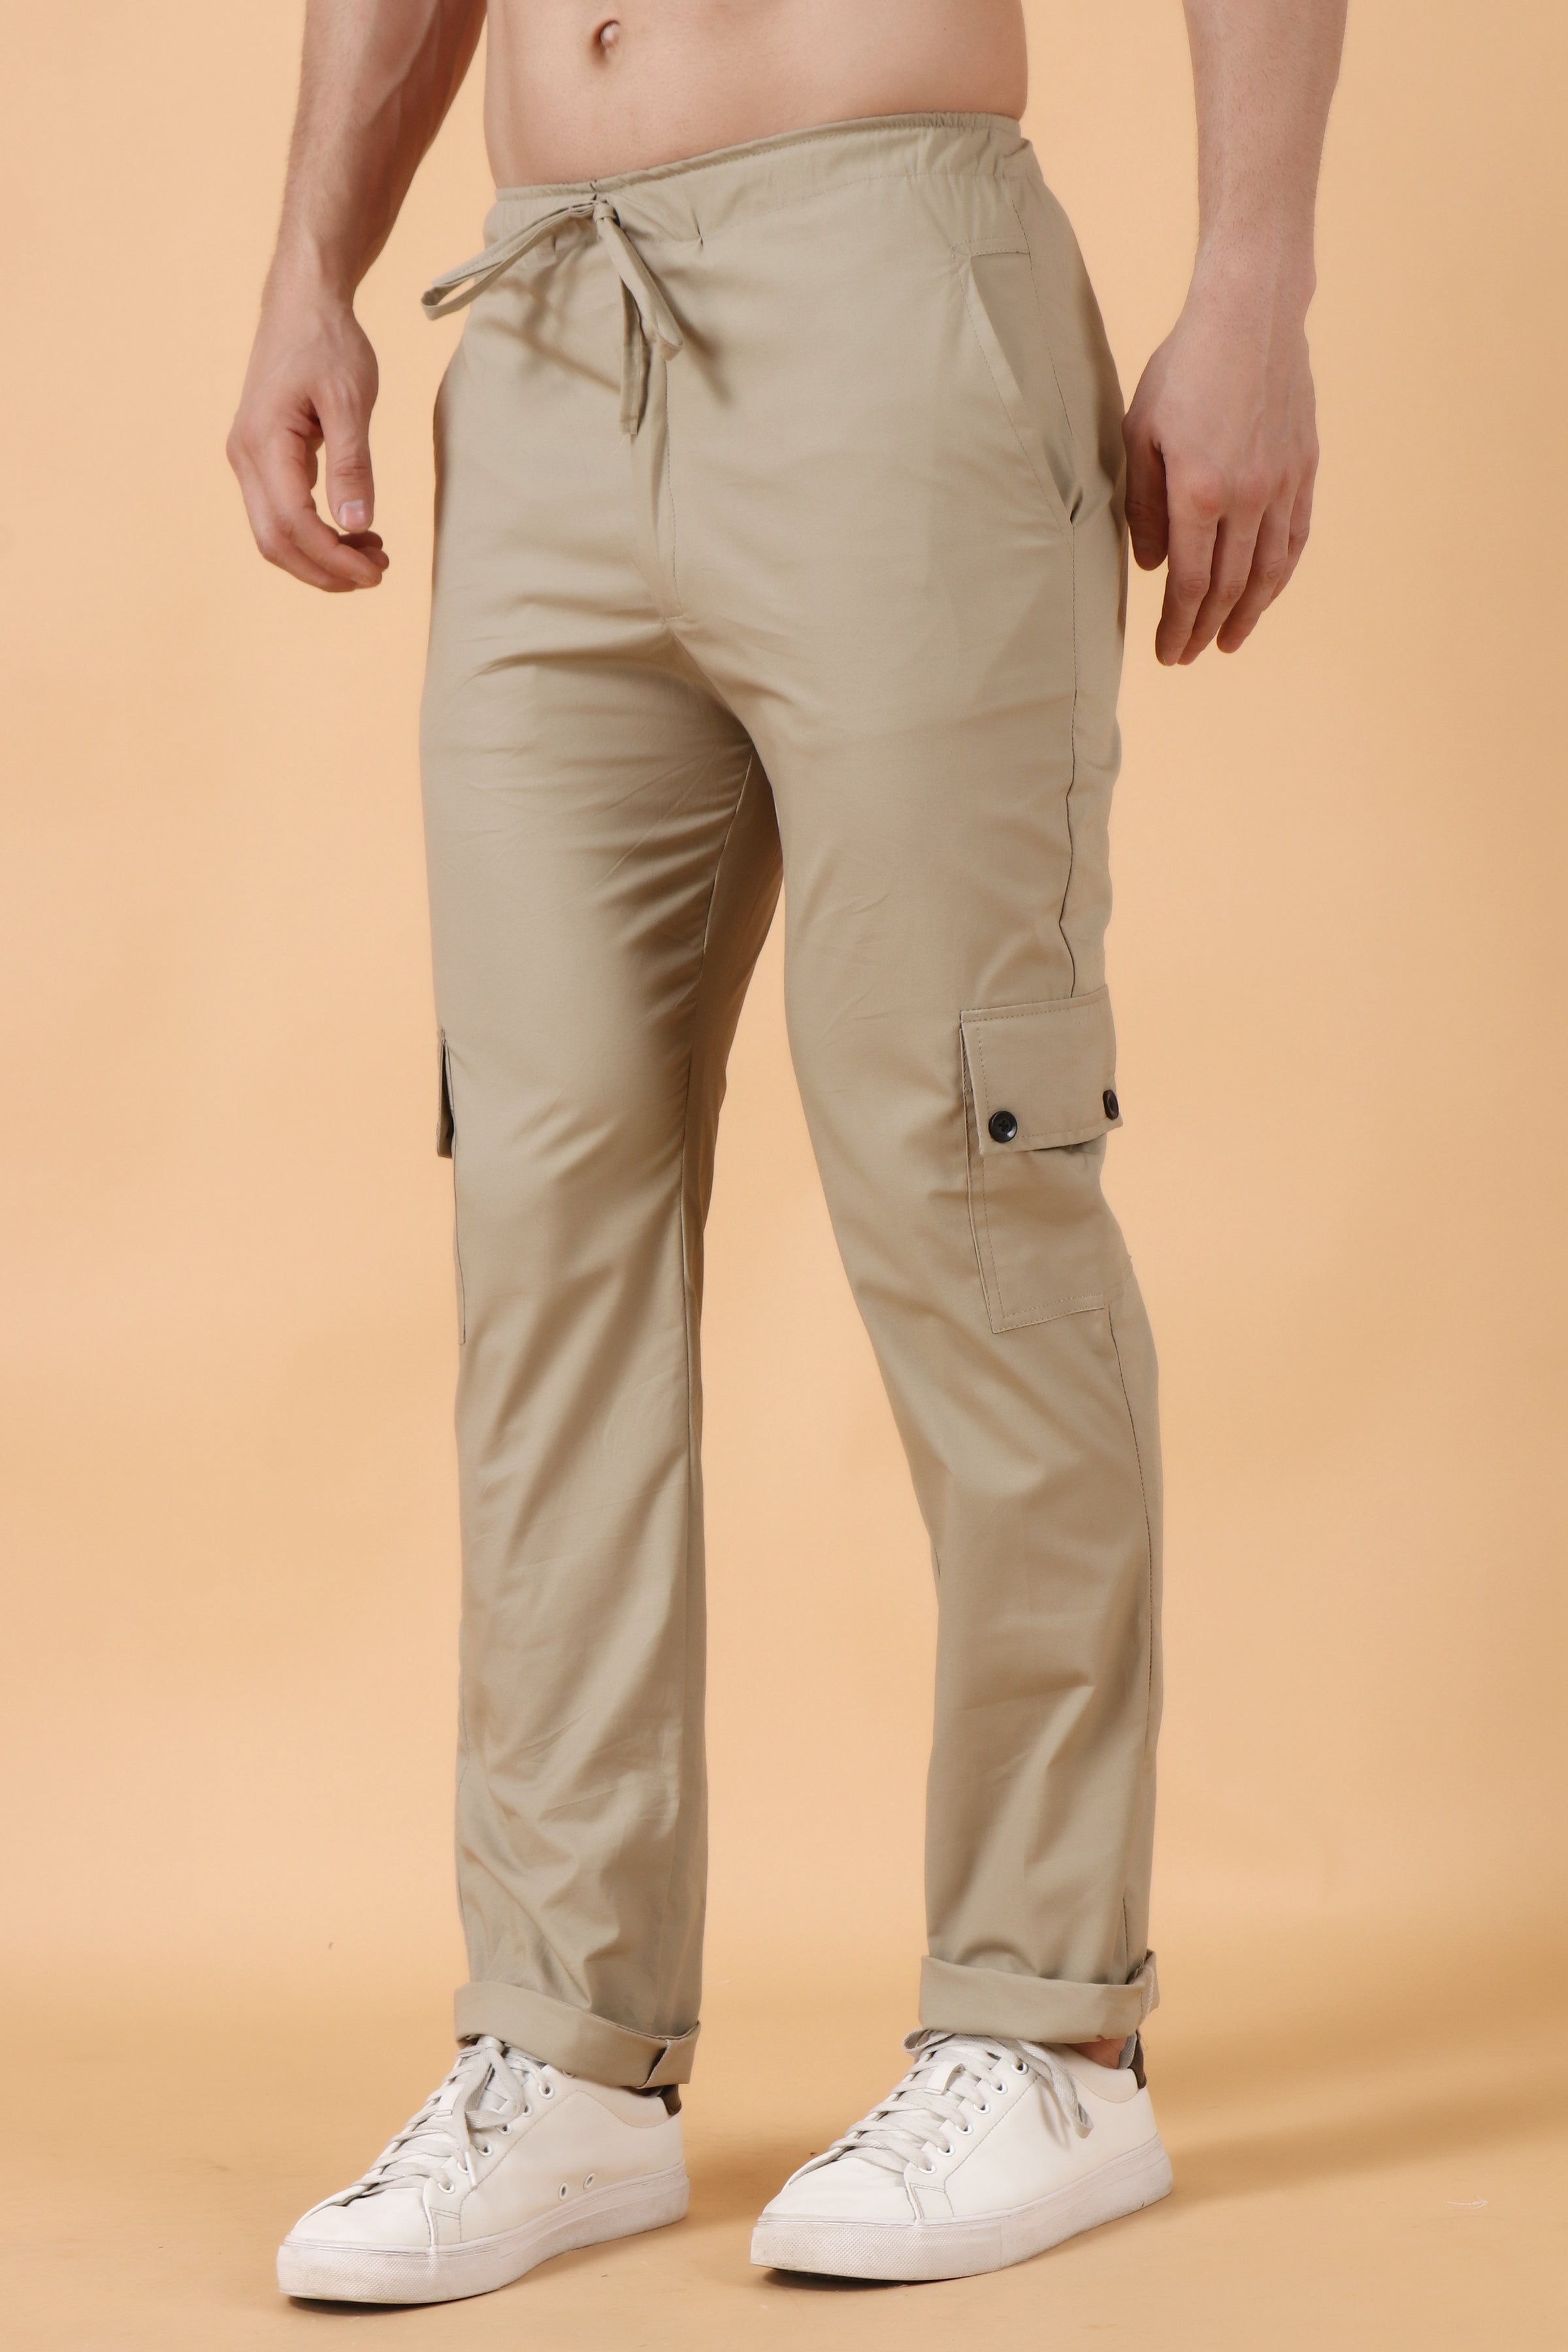 Mens Cargo Pants Mens Trousers Casual Bottoms Elastic Bottom Hem  China  Trousers and Pants price  MadeinChinacom